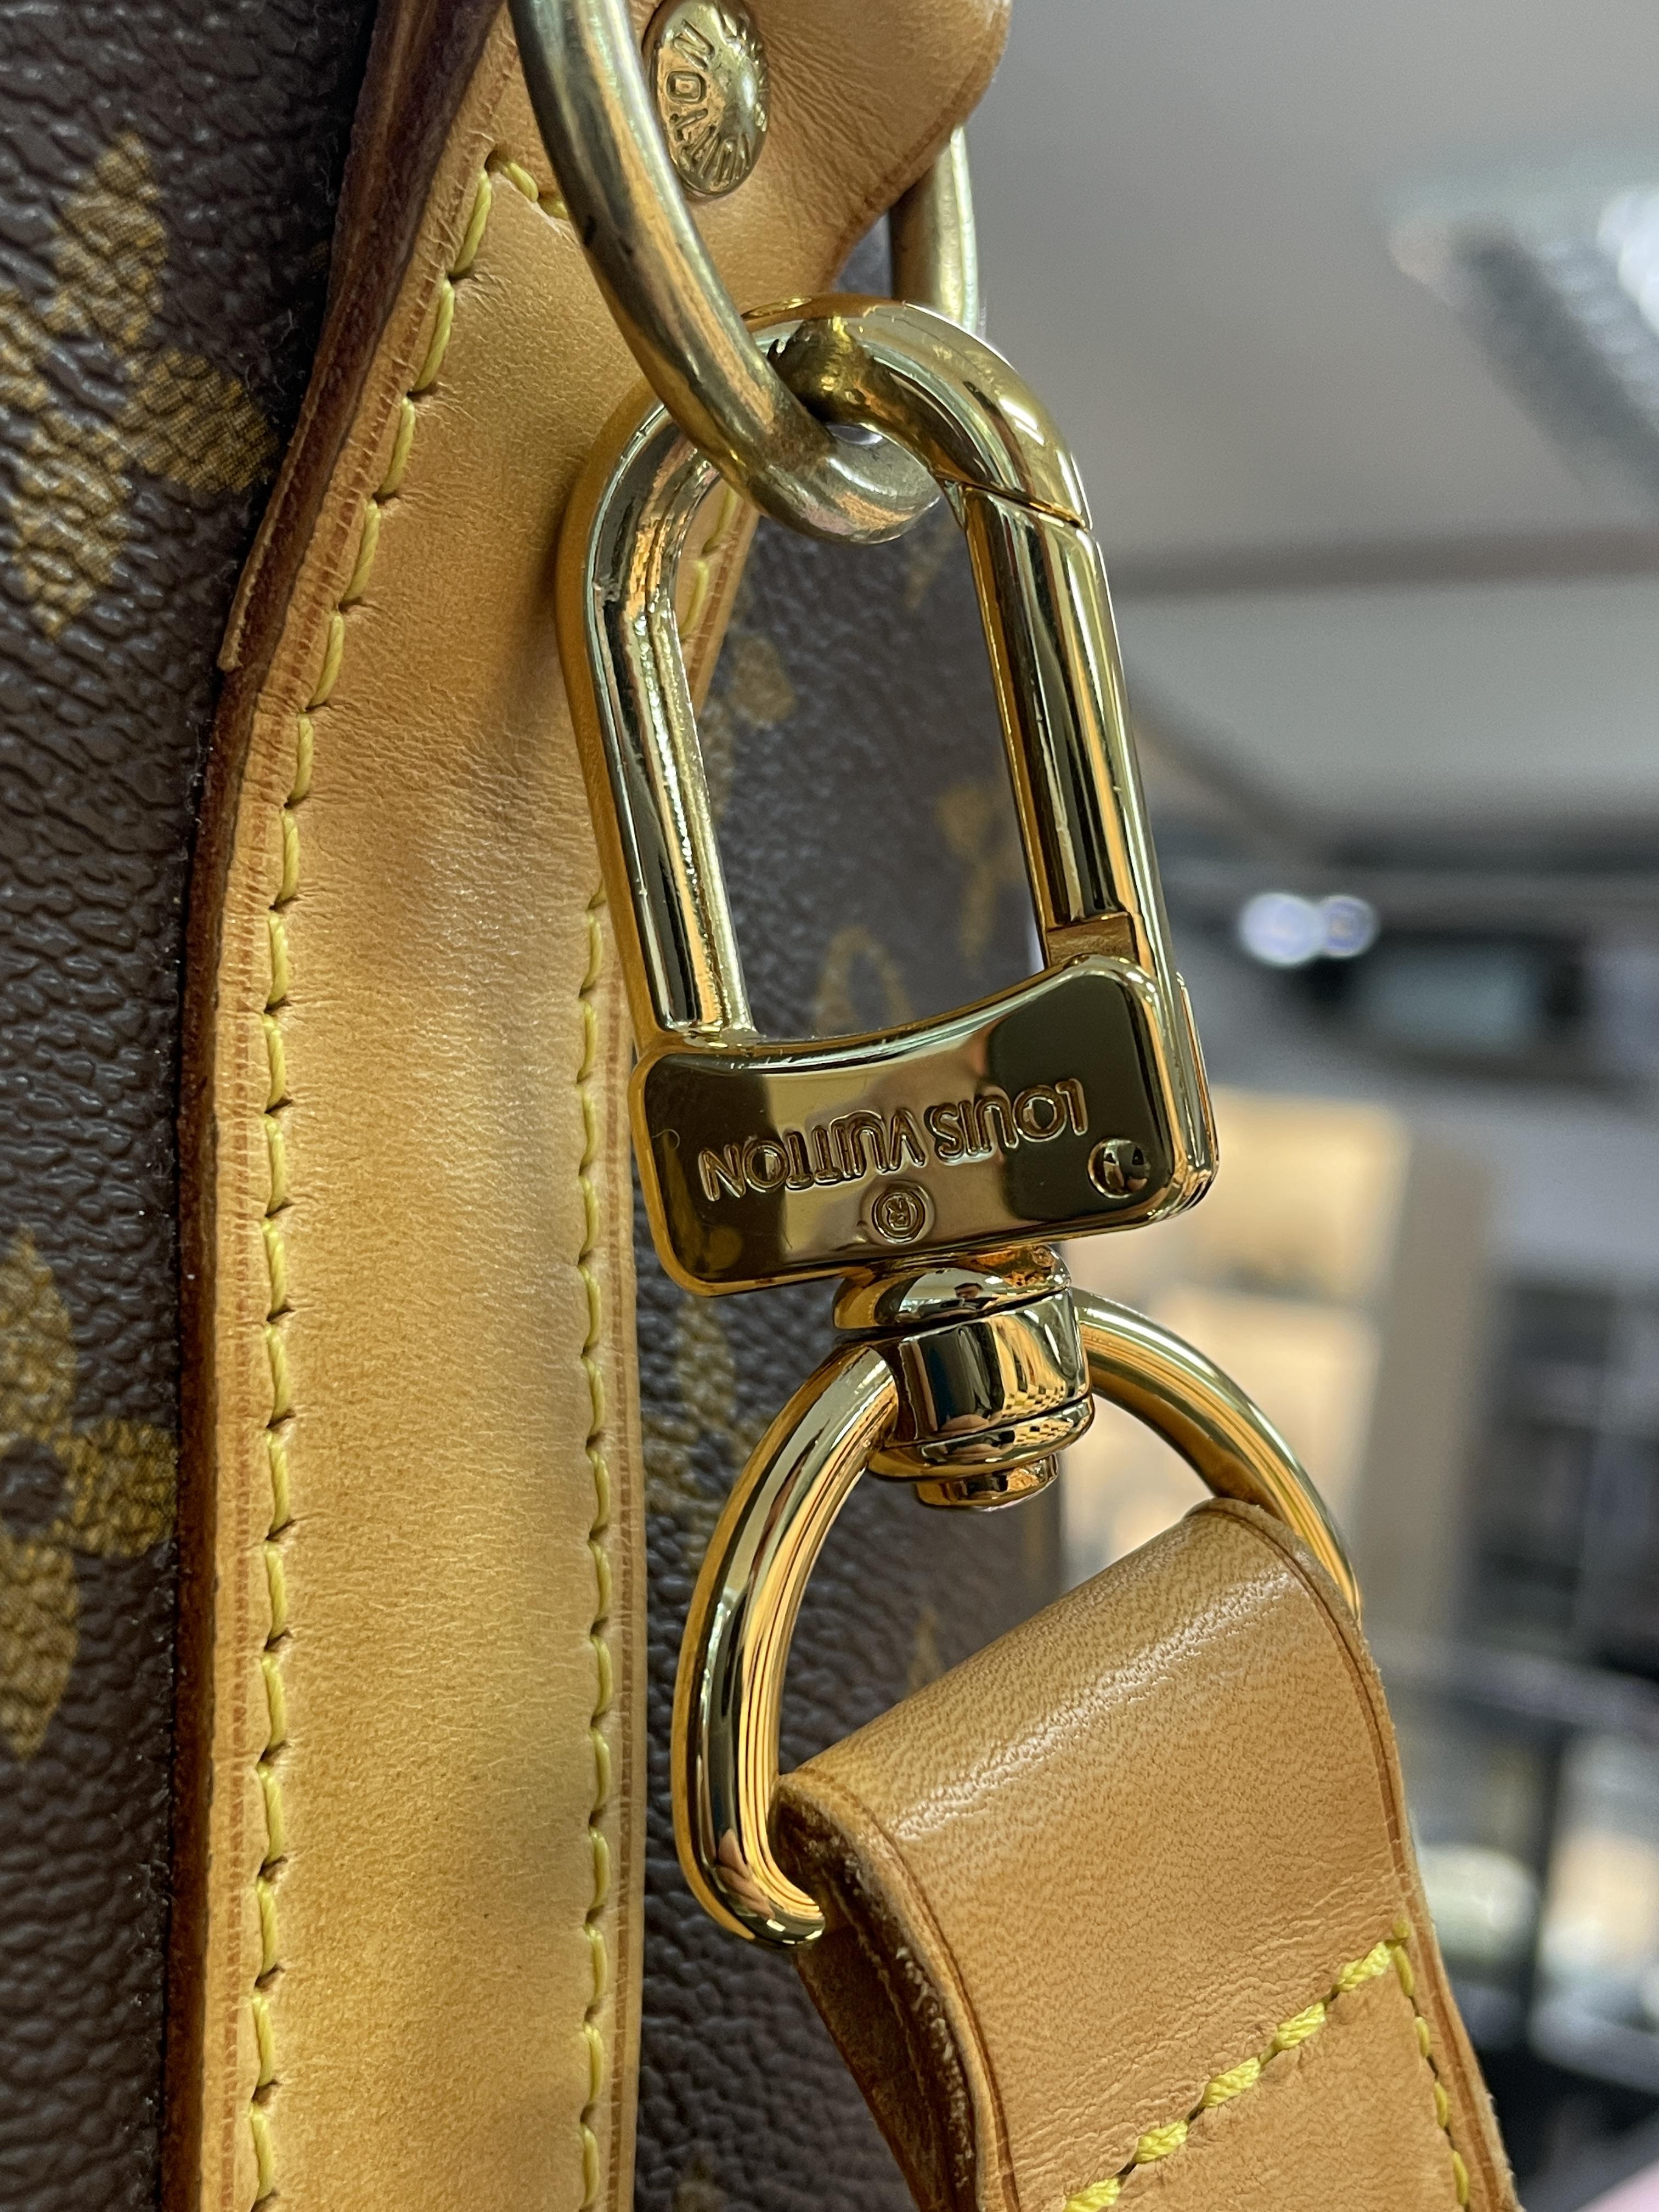 LOUIS VUITTON KEEPALL BANDOULIERE - Image 5 of 10